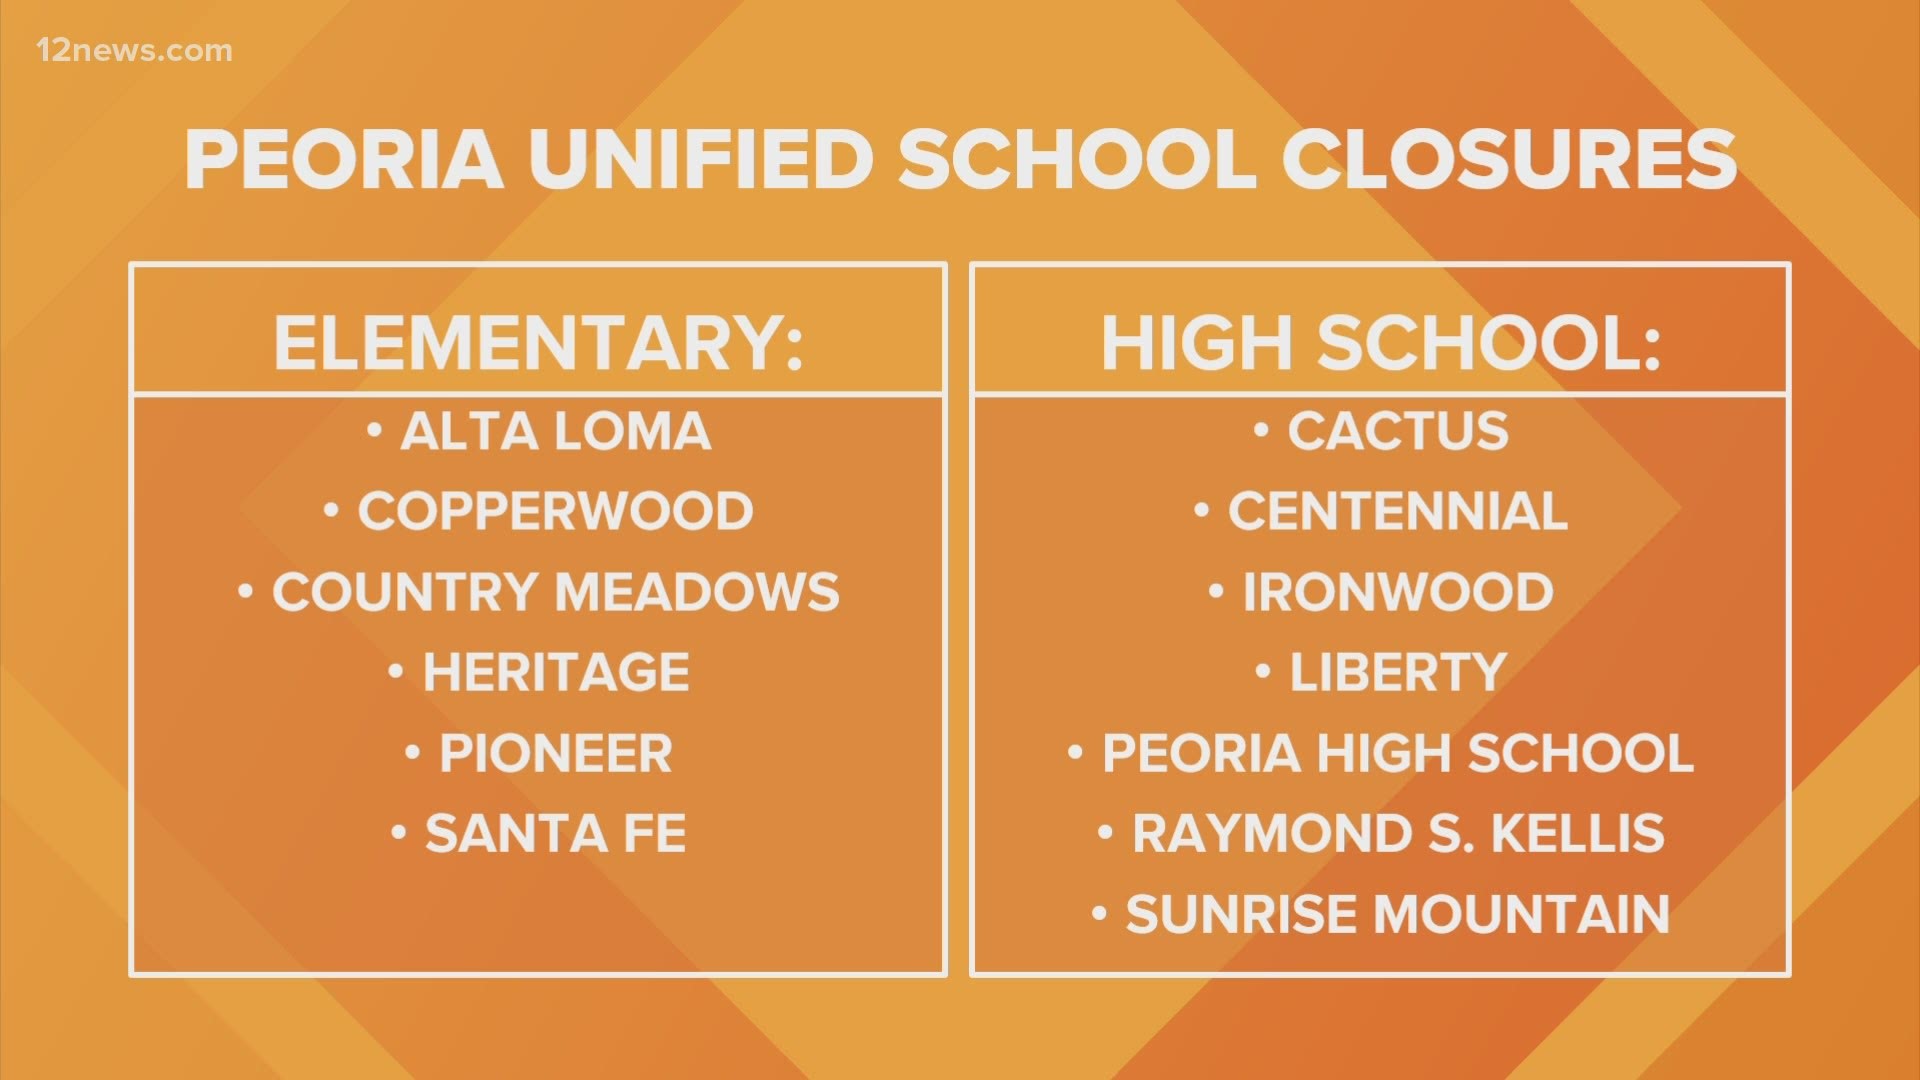 Classes are canceled Monday for more than a dozen schools in the Peoria Unified School District. Team 12's Matt Yurus has the latest.